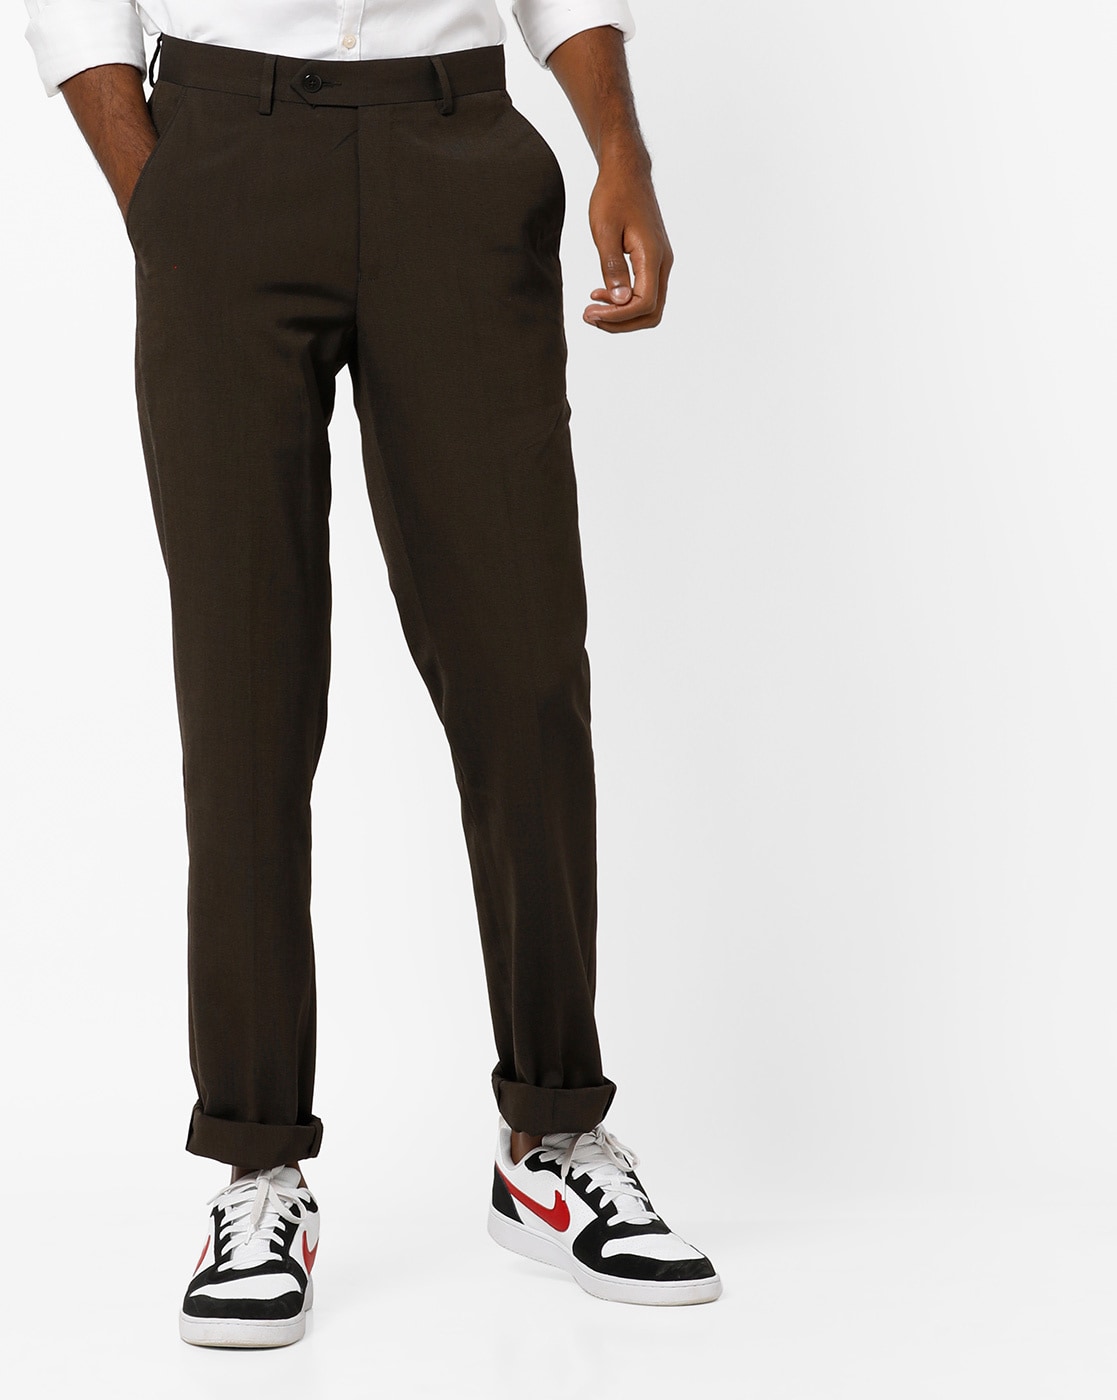 Peter England Black Casual Cotton Trousers  Buy Peter England Black Casual  Cotton Trousers Online at Best Prices in India on Snapdeal